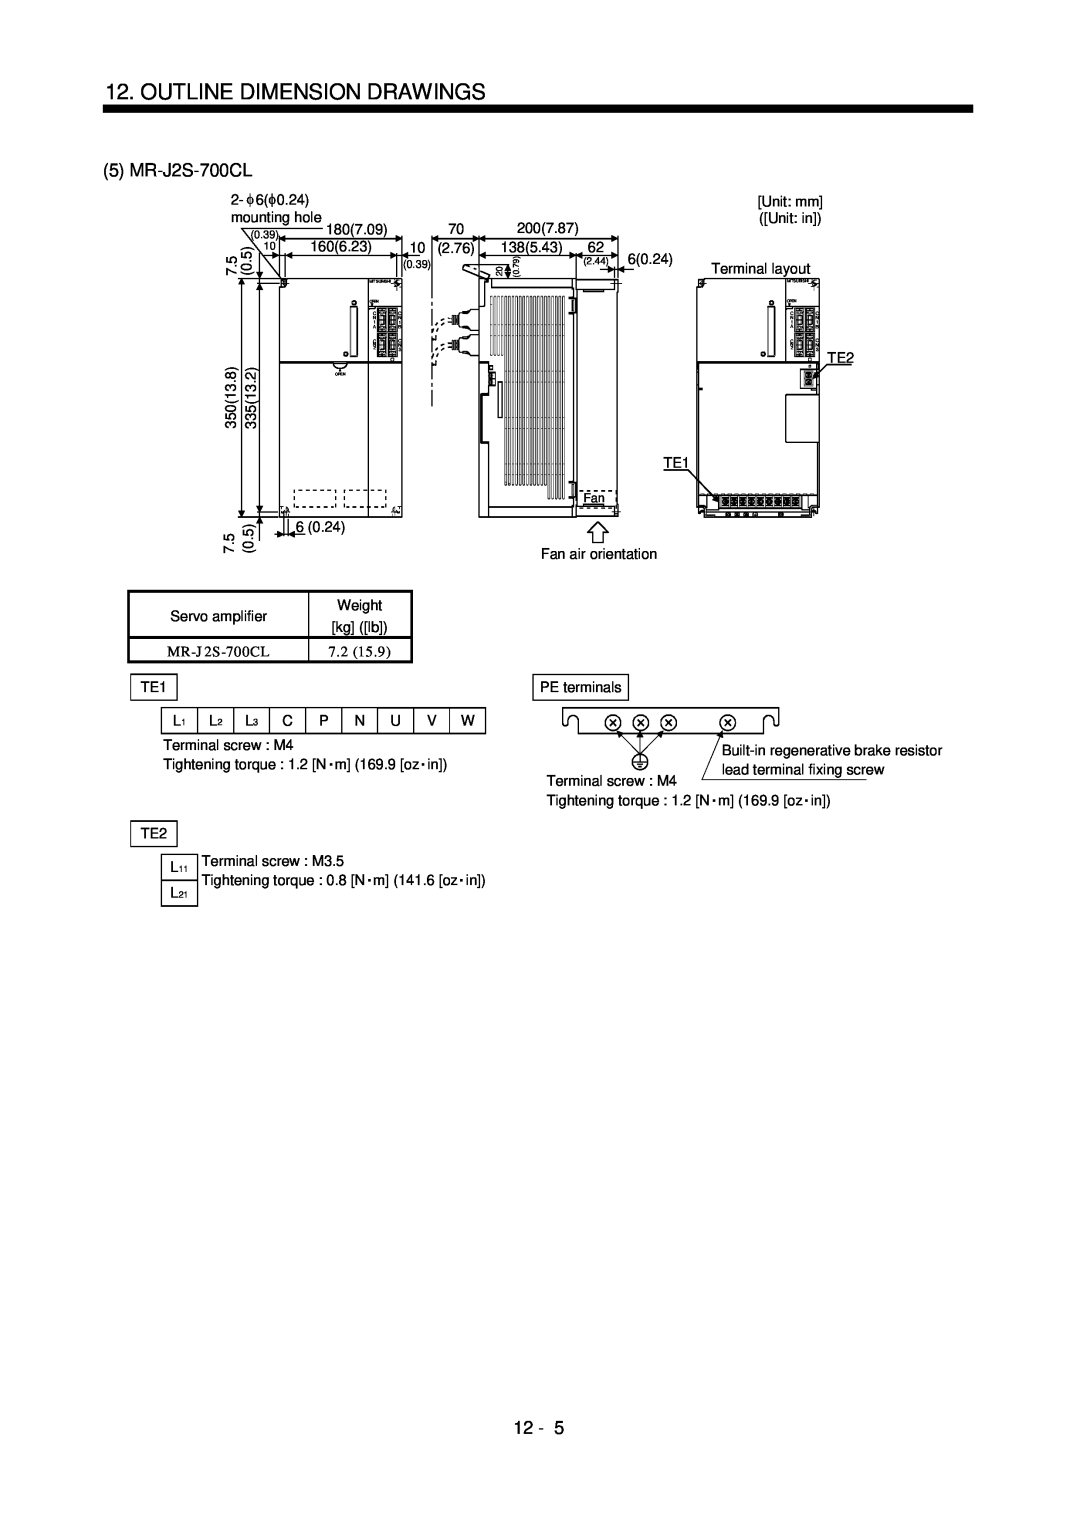 Mitsubishi Electronics MR-J2S- CL specifications MR-J2S-700CL, Outline Dimension Drawings, 12 